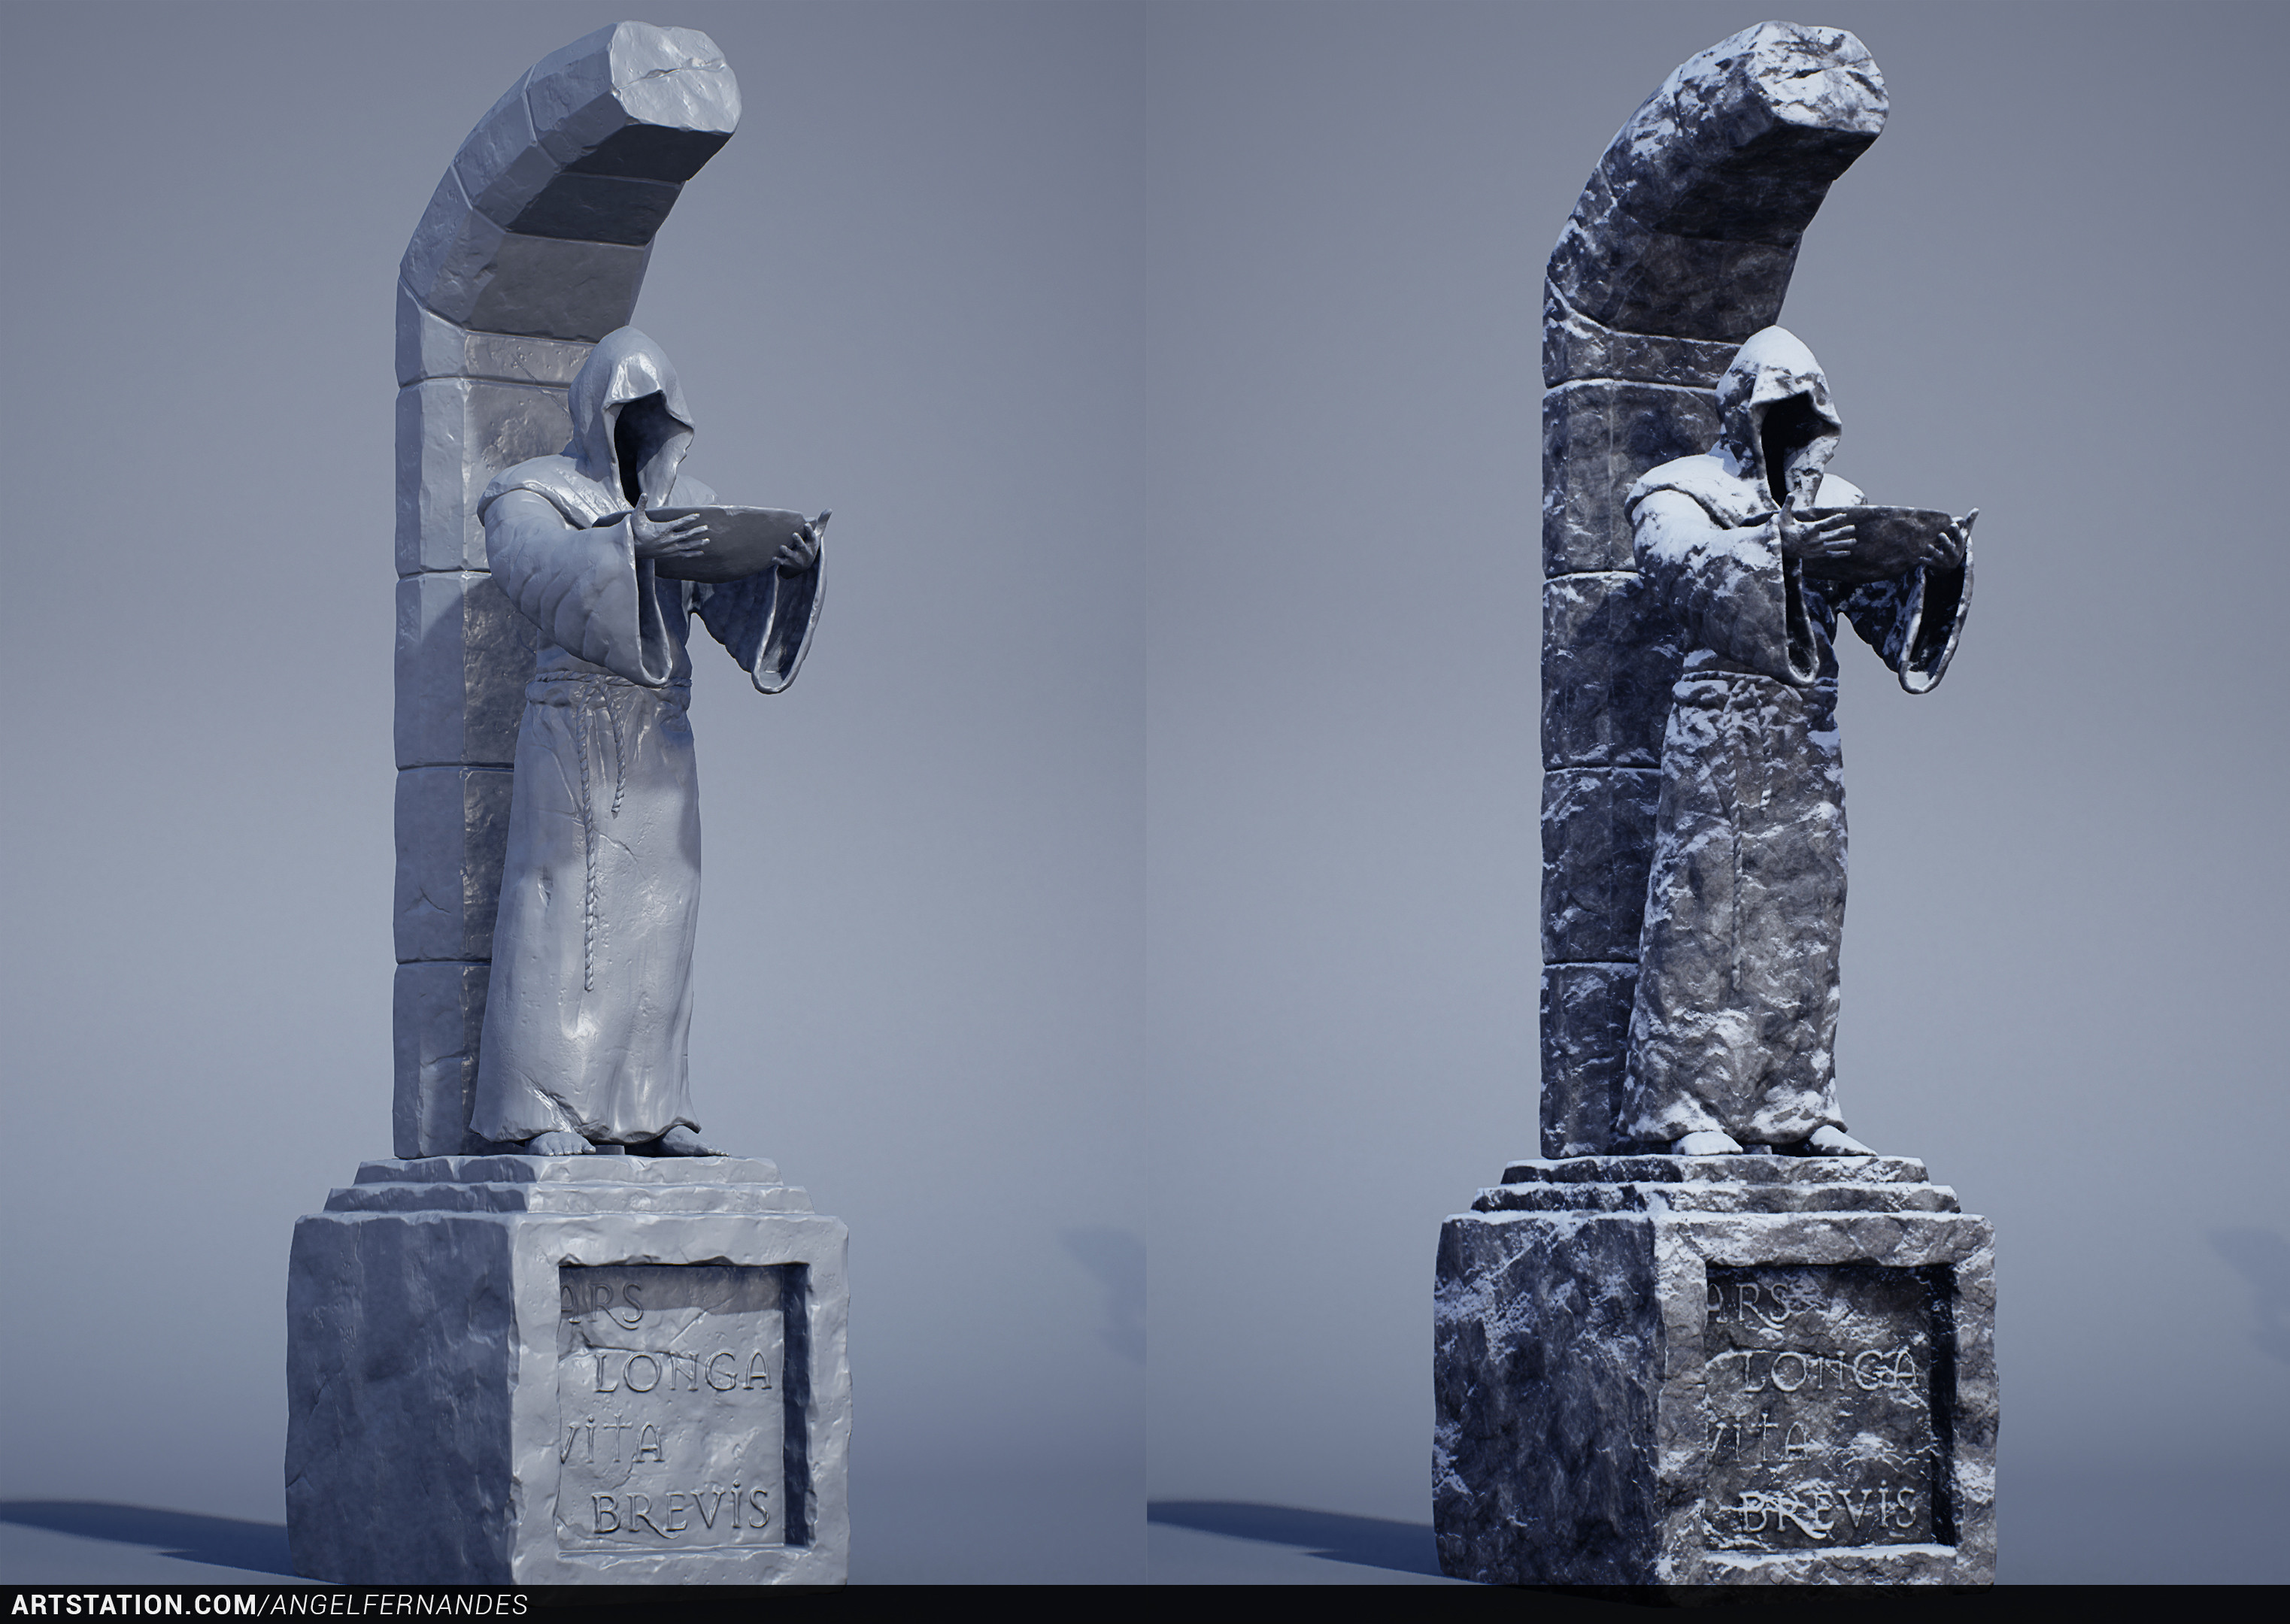 Low-poly + normal map on the left and full shader on the right.